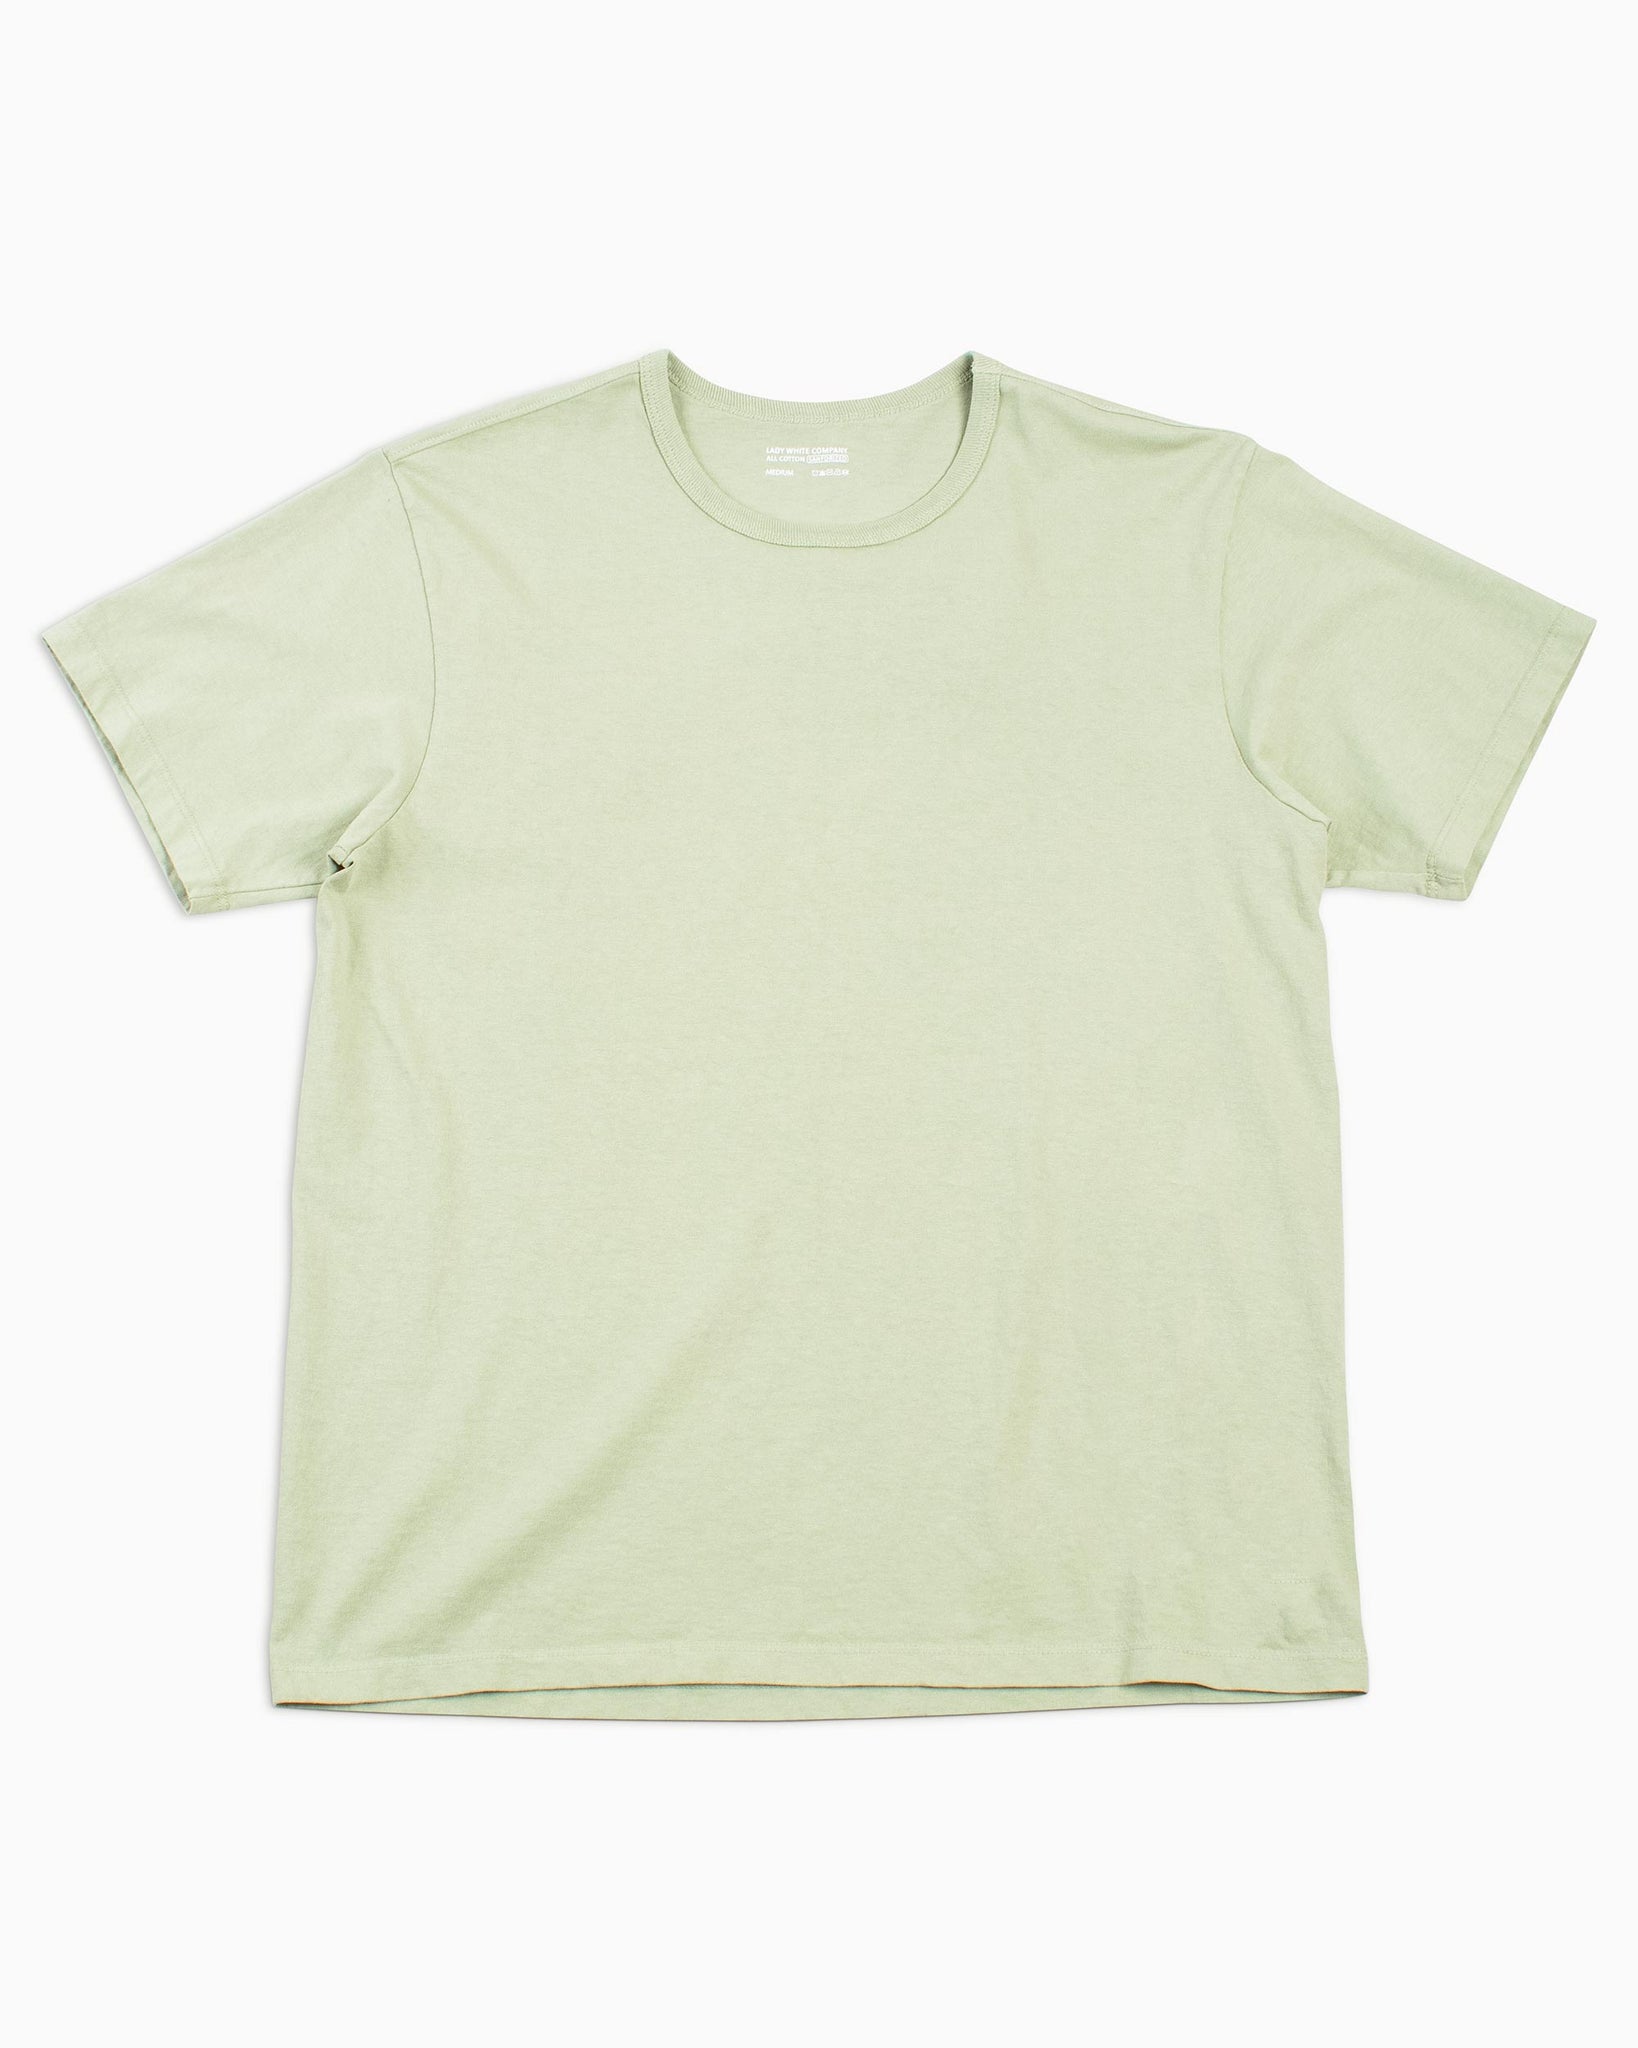 Lady White Co. Our T-Shirt Dark Mint